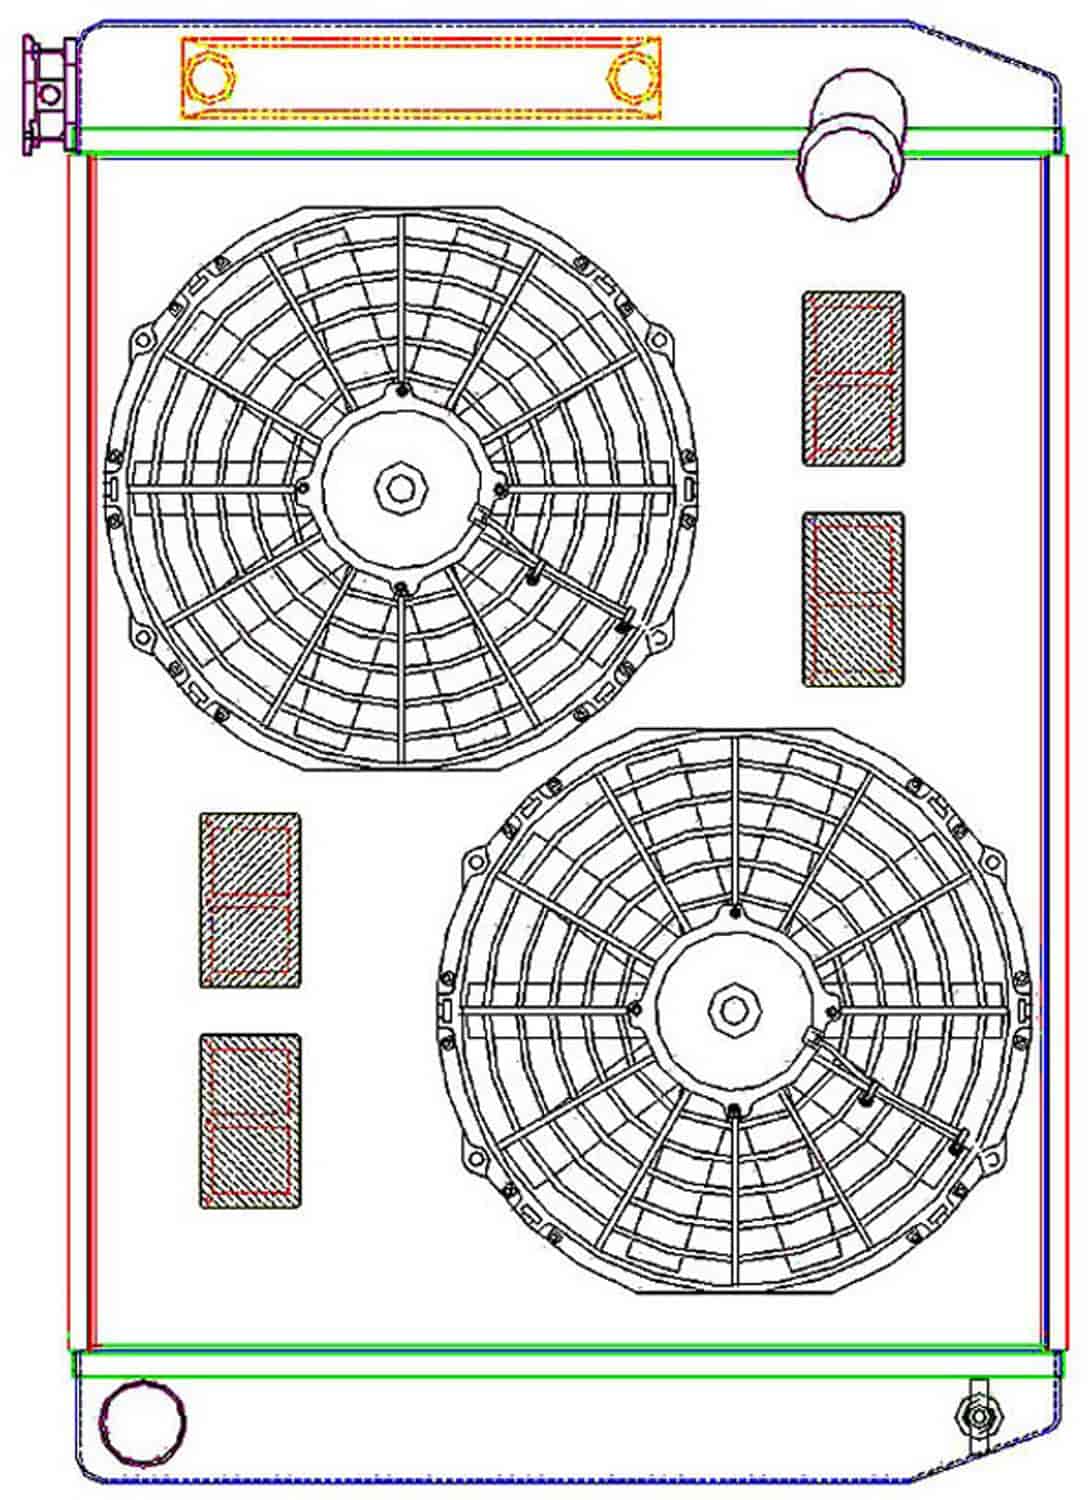 MegaCool ComboUnit Universal Fit Radiator and Fan Single Pass Crossflow Design 27.50" x 19" with Transmission Cooler